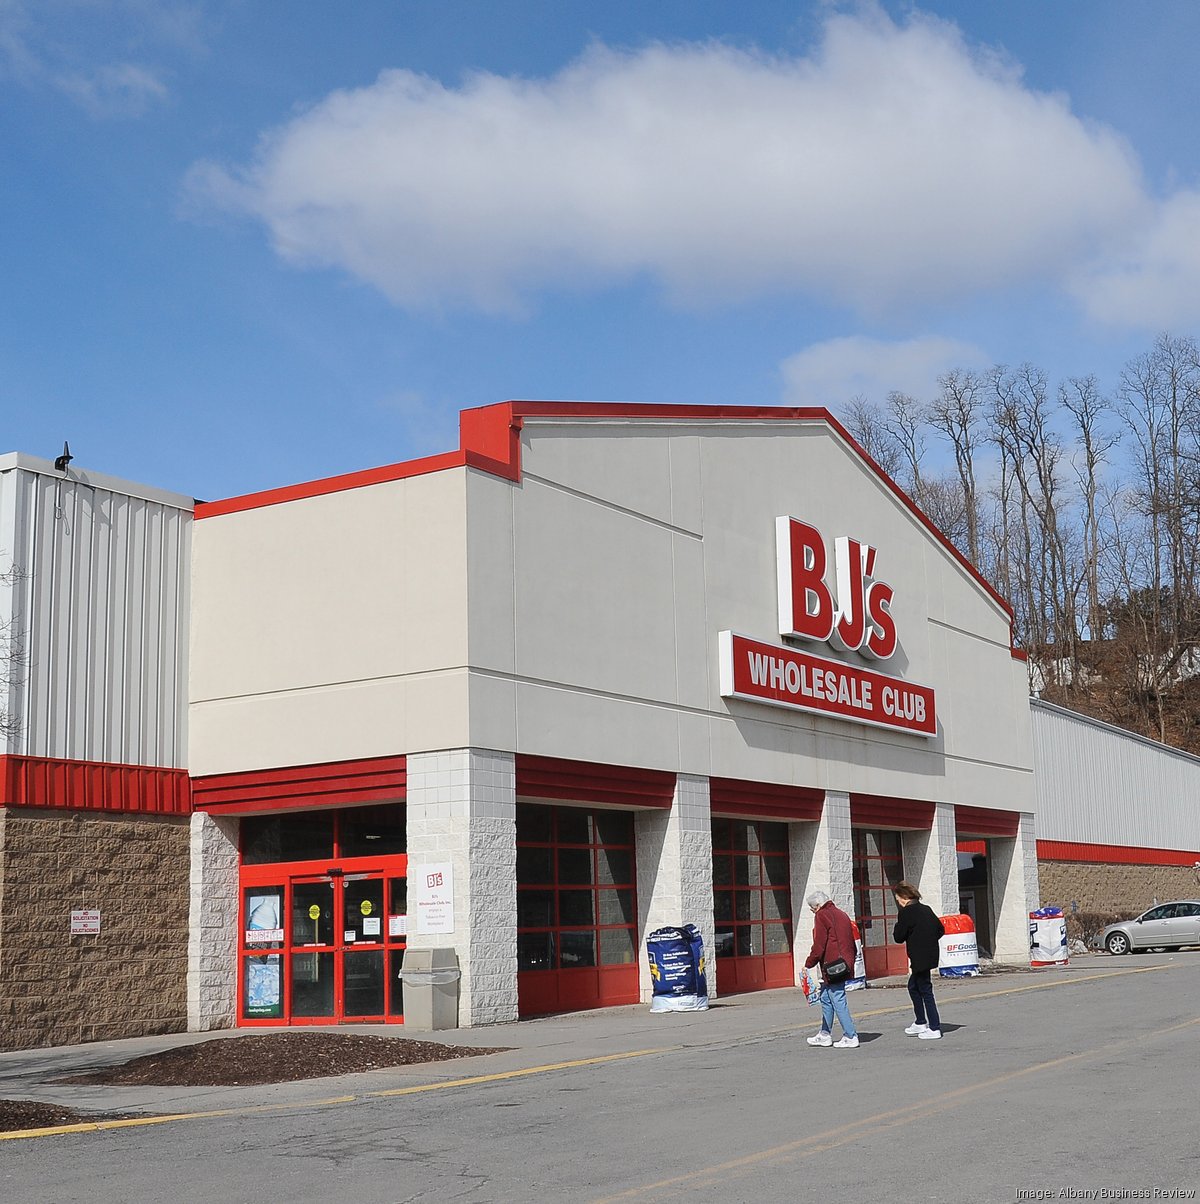 A New BJ's Wholesale Club Is Opening In North Jacksonville!